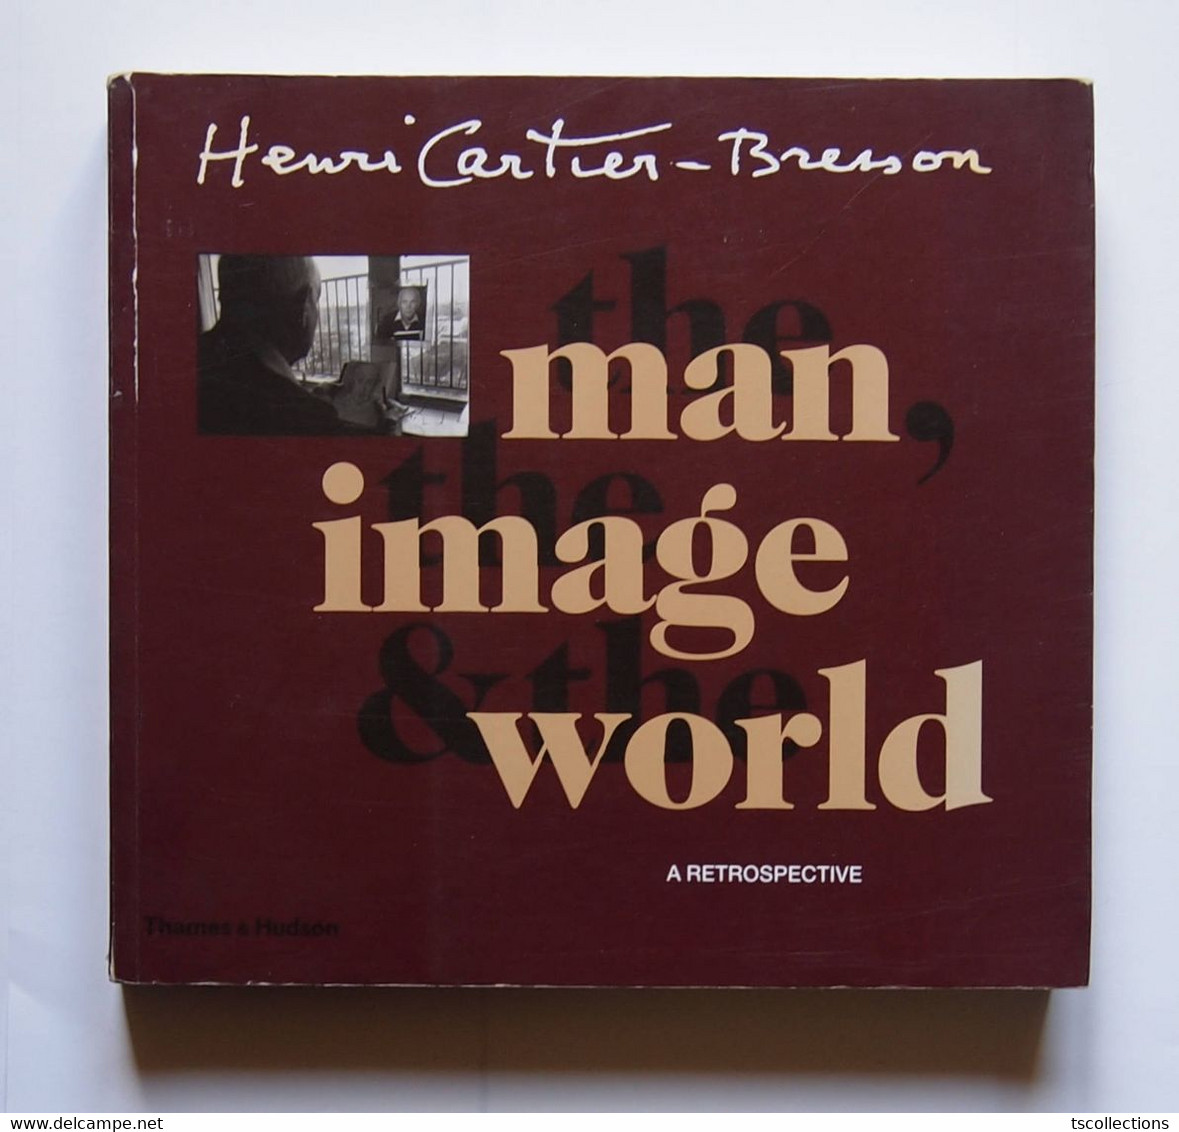 Henri Cartier-Bresson The Man, The Image And The World: A Retrospective - Photographie